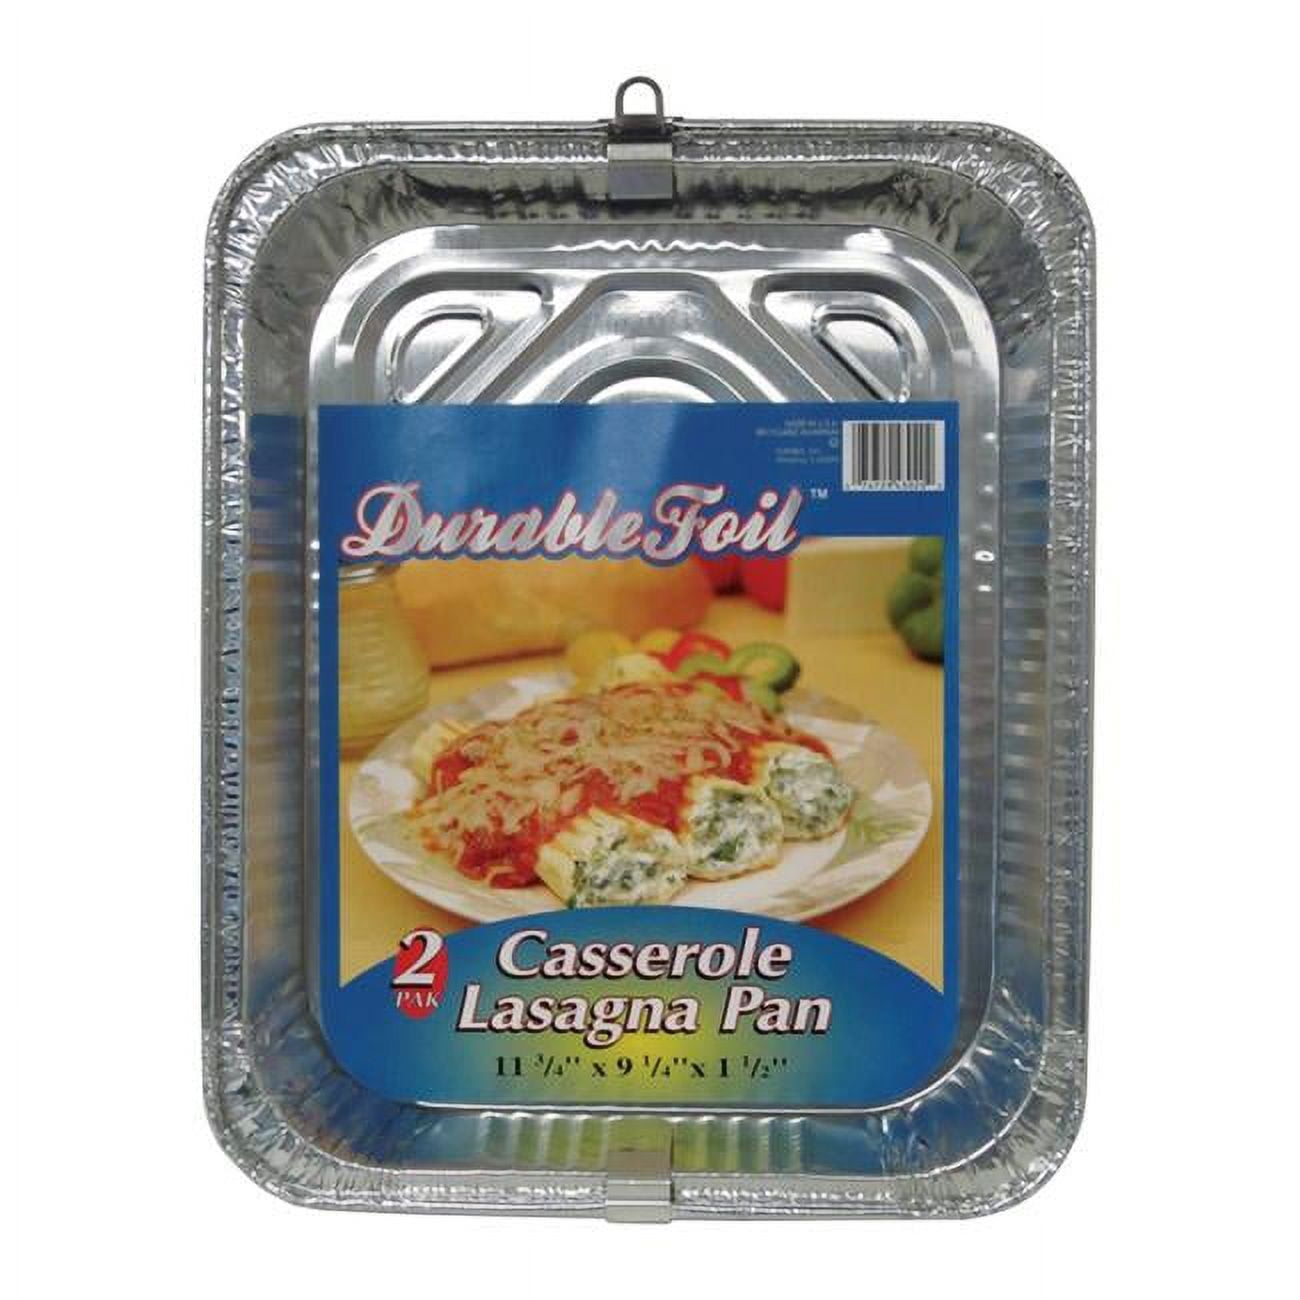 6392039 9.25 X 11.75 In. Durable Foil Casserole Lasagna Pan - Silver- Pack Of 12